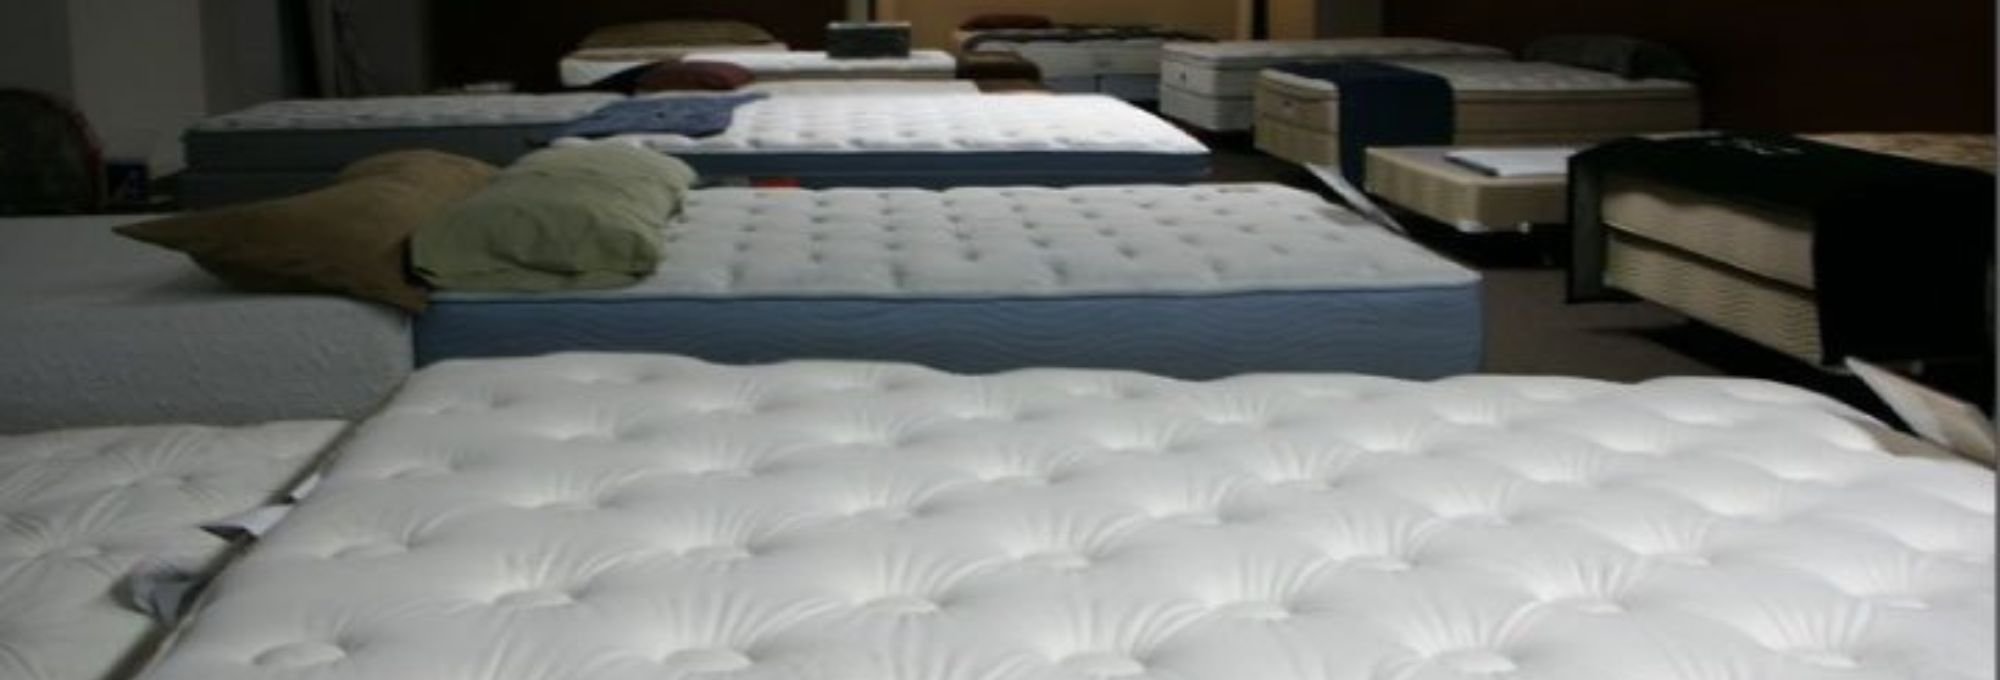 Mattresses in showroom from Carpet Plus in the Worthington, MN area